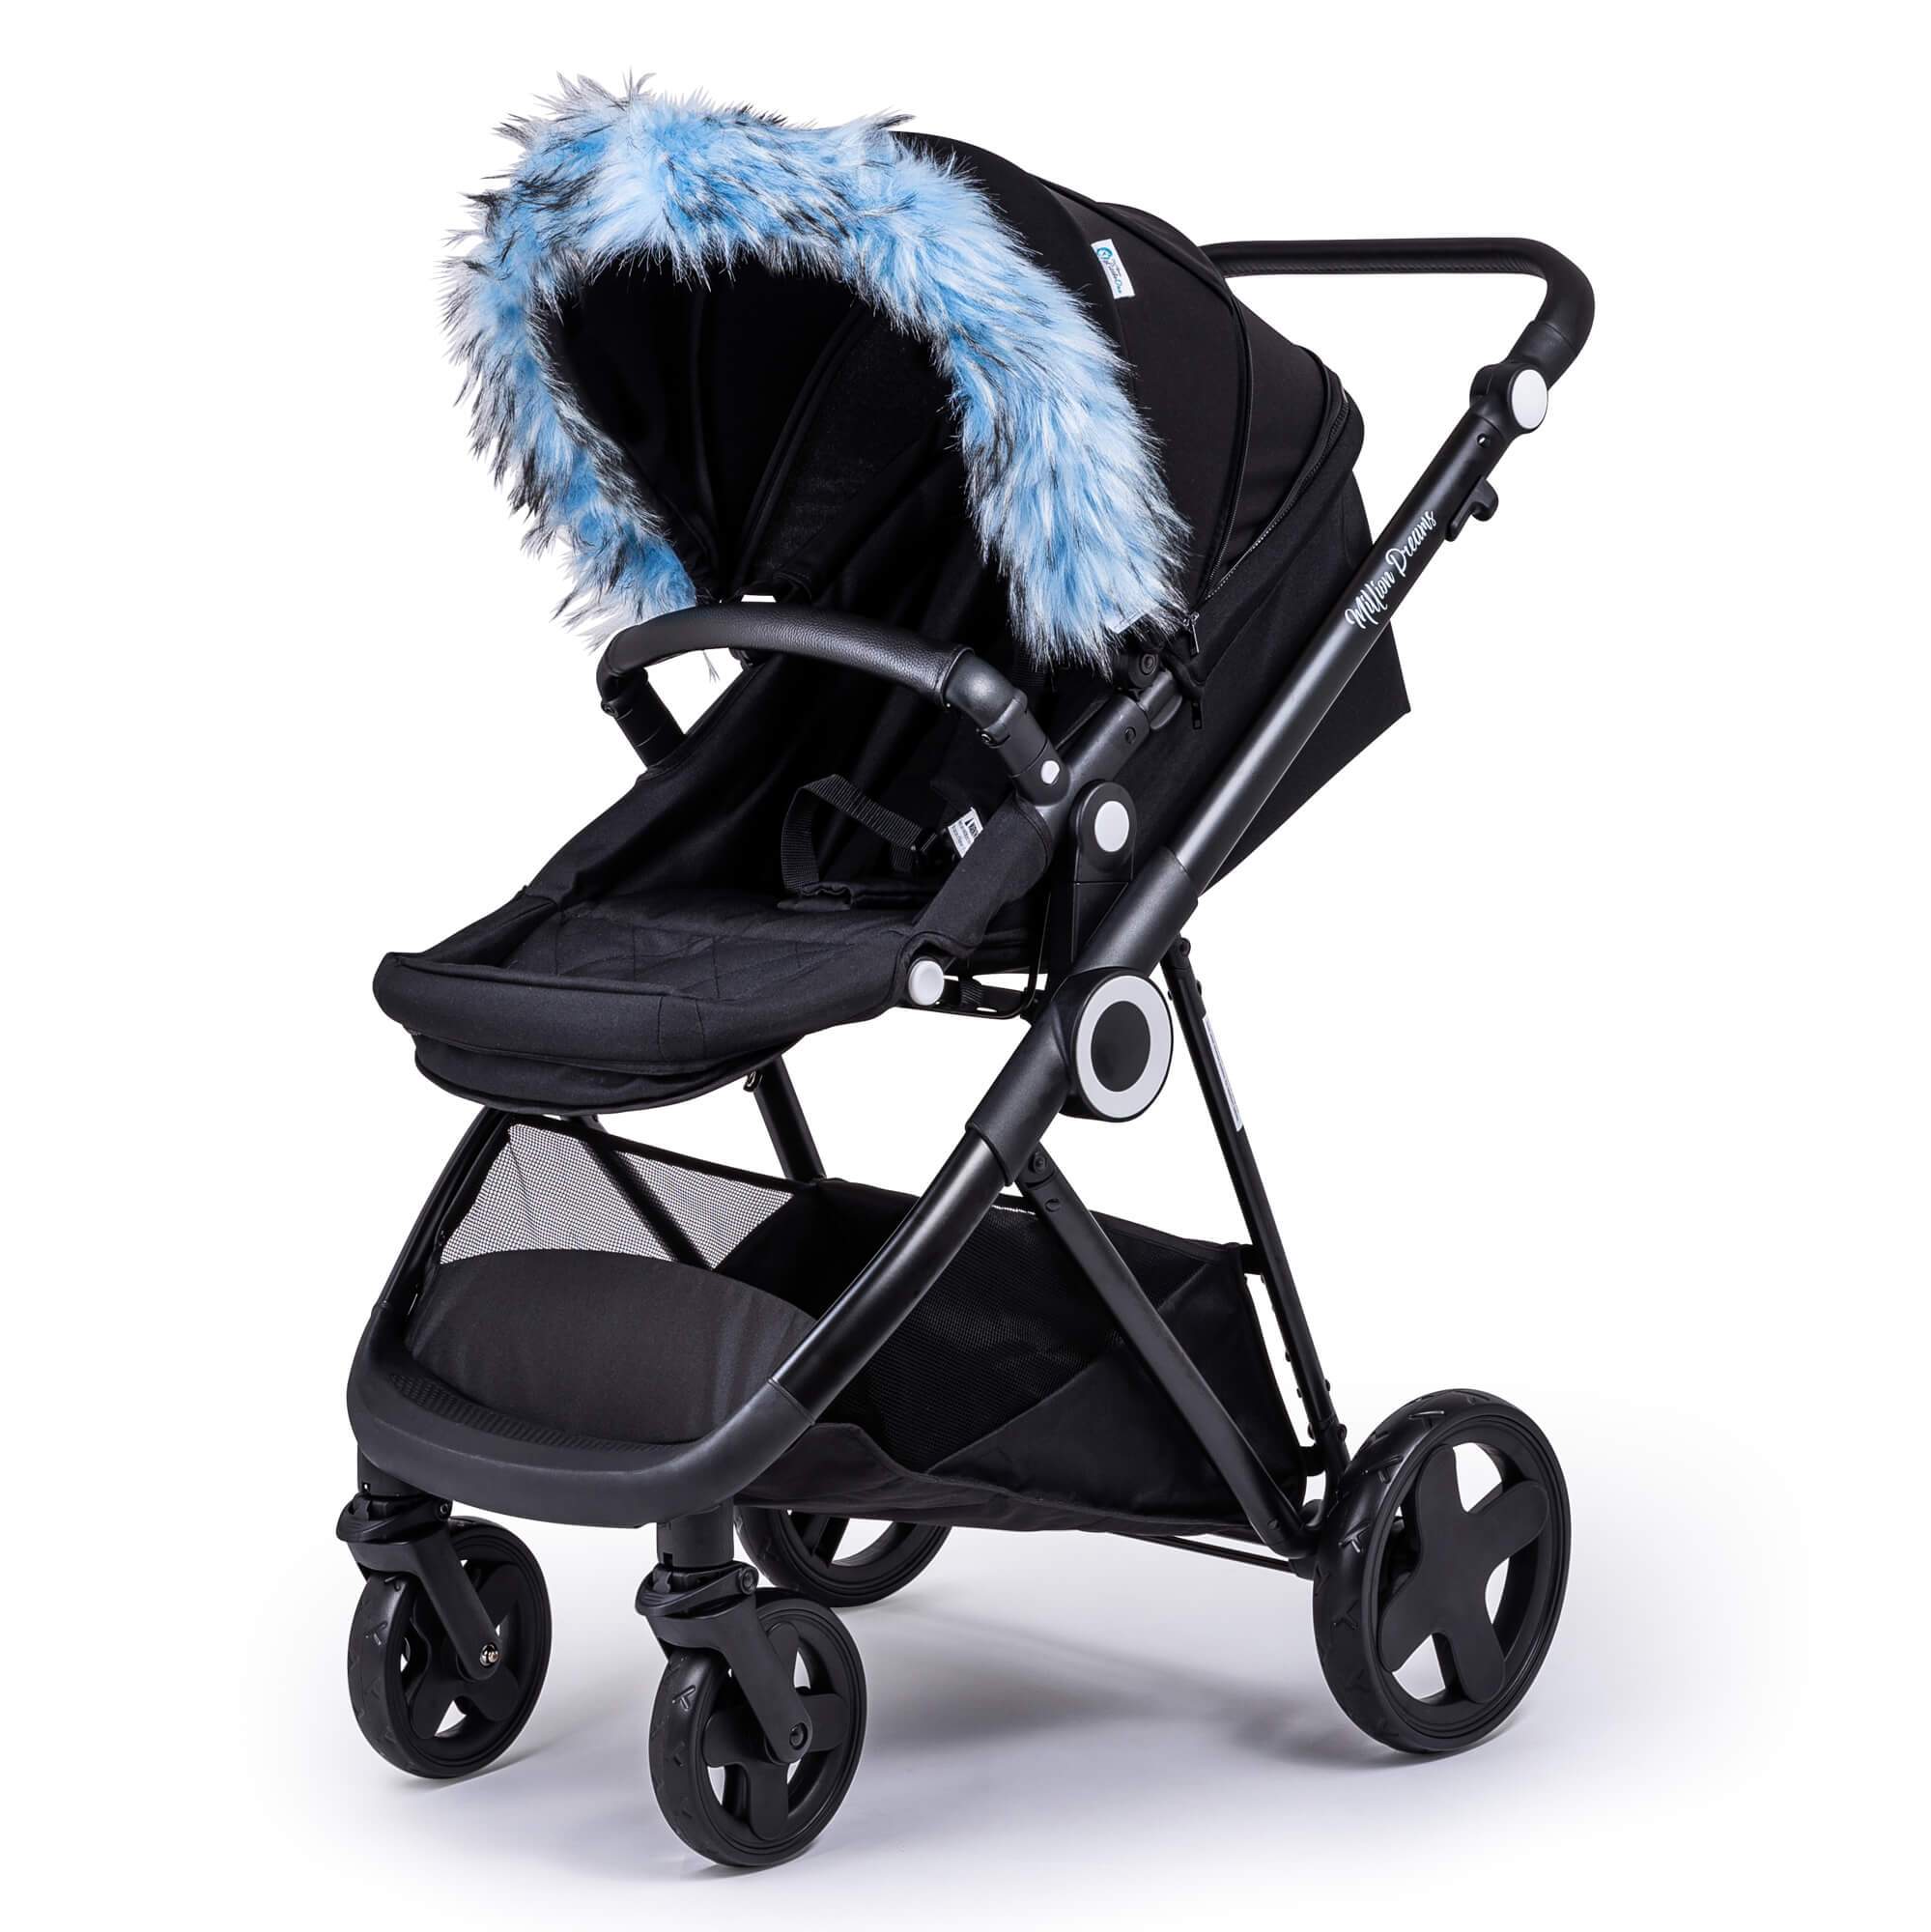 Pram Fur Hood Trim Attachment for Pushchair Compatible with XTS - Light Blue / Fits All Models | For Your Little One